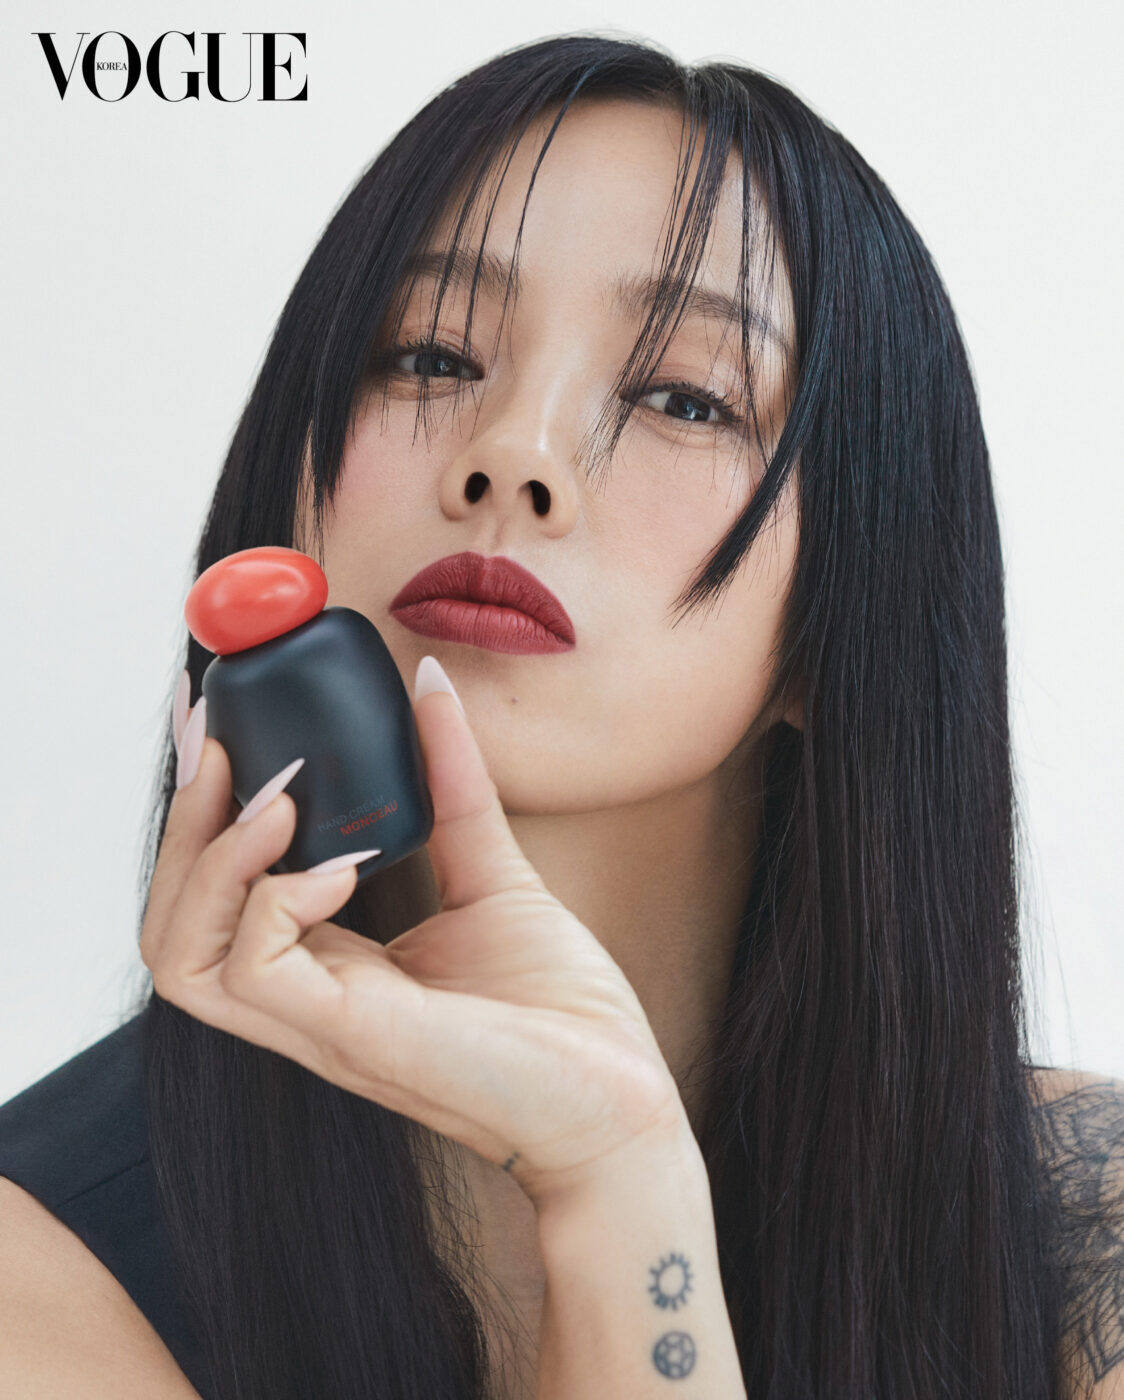 Former K-pop star and activist Lee Hyo-ri poses with Siita's new sustainable hand lotion for Vogue magazine. (Siita)